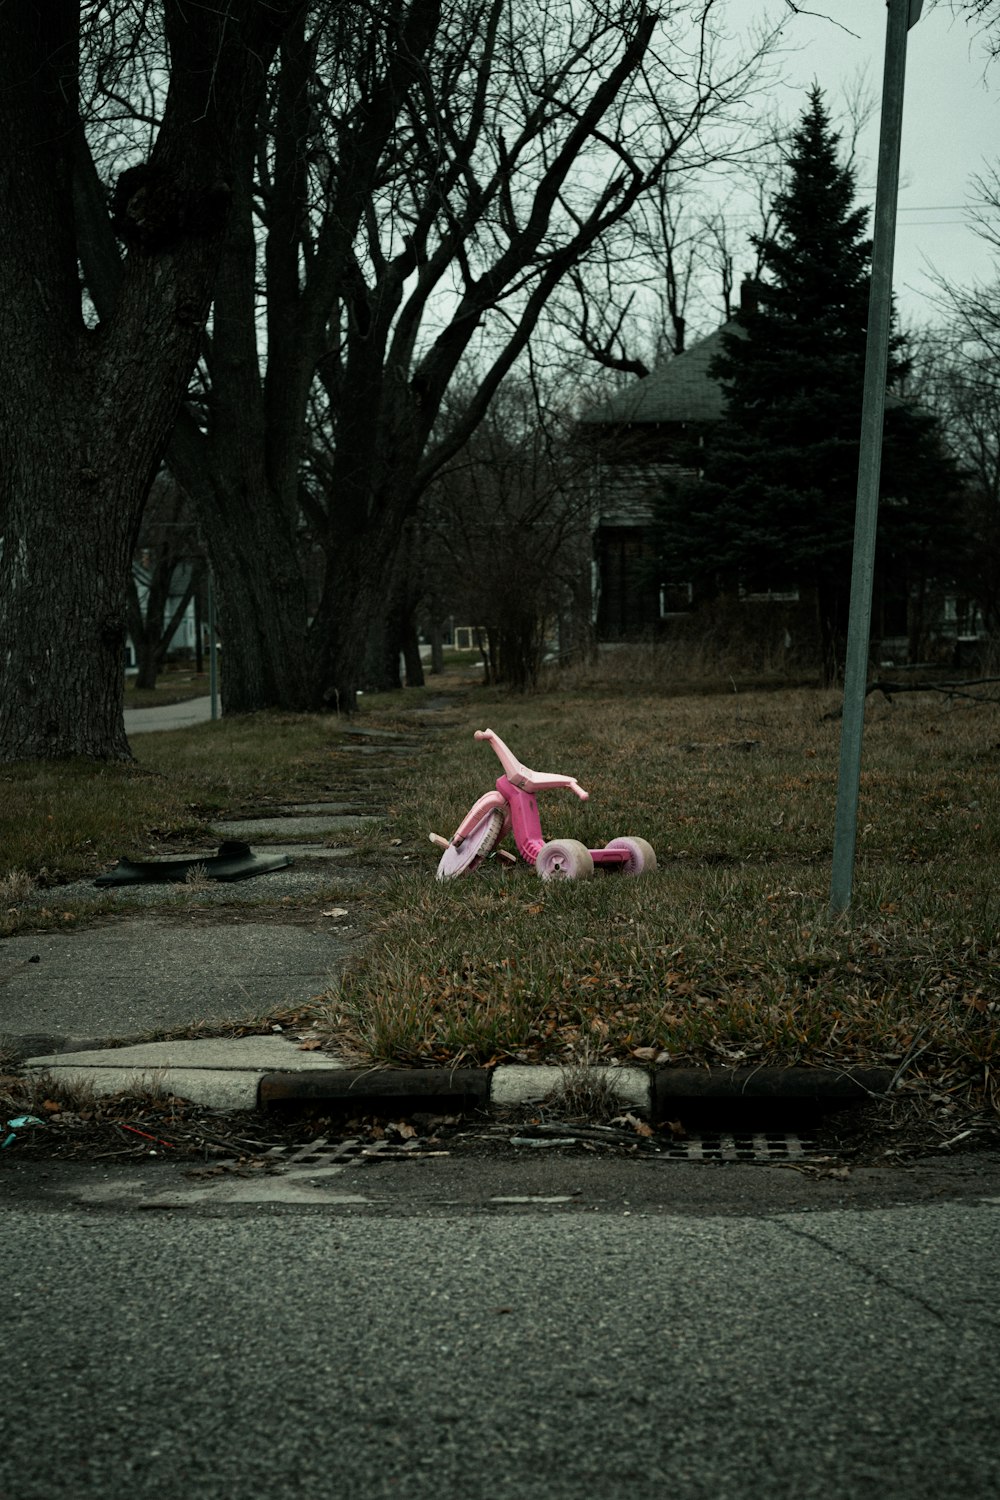 a pink stuffed animal laying on the ground next to a street